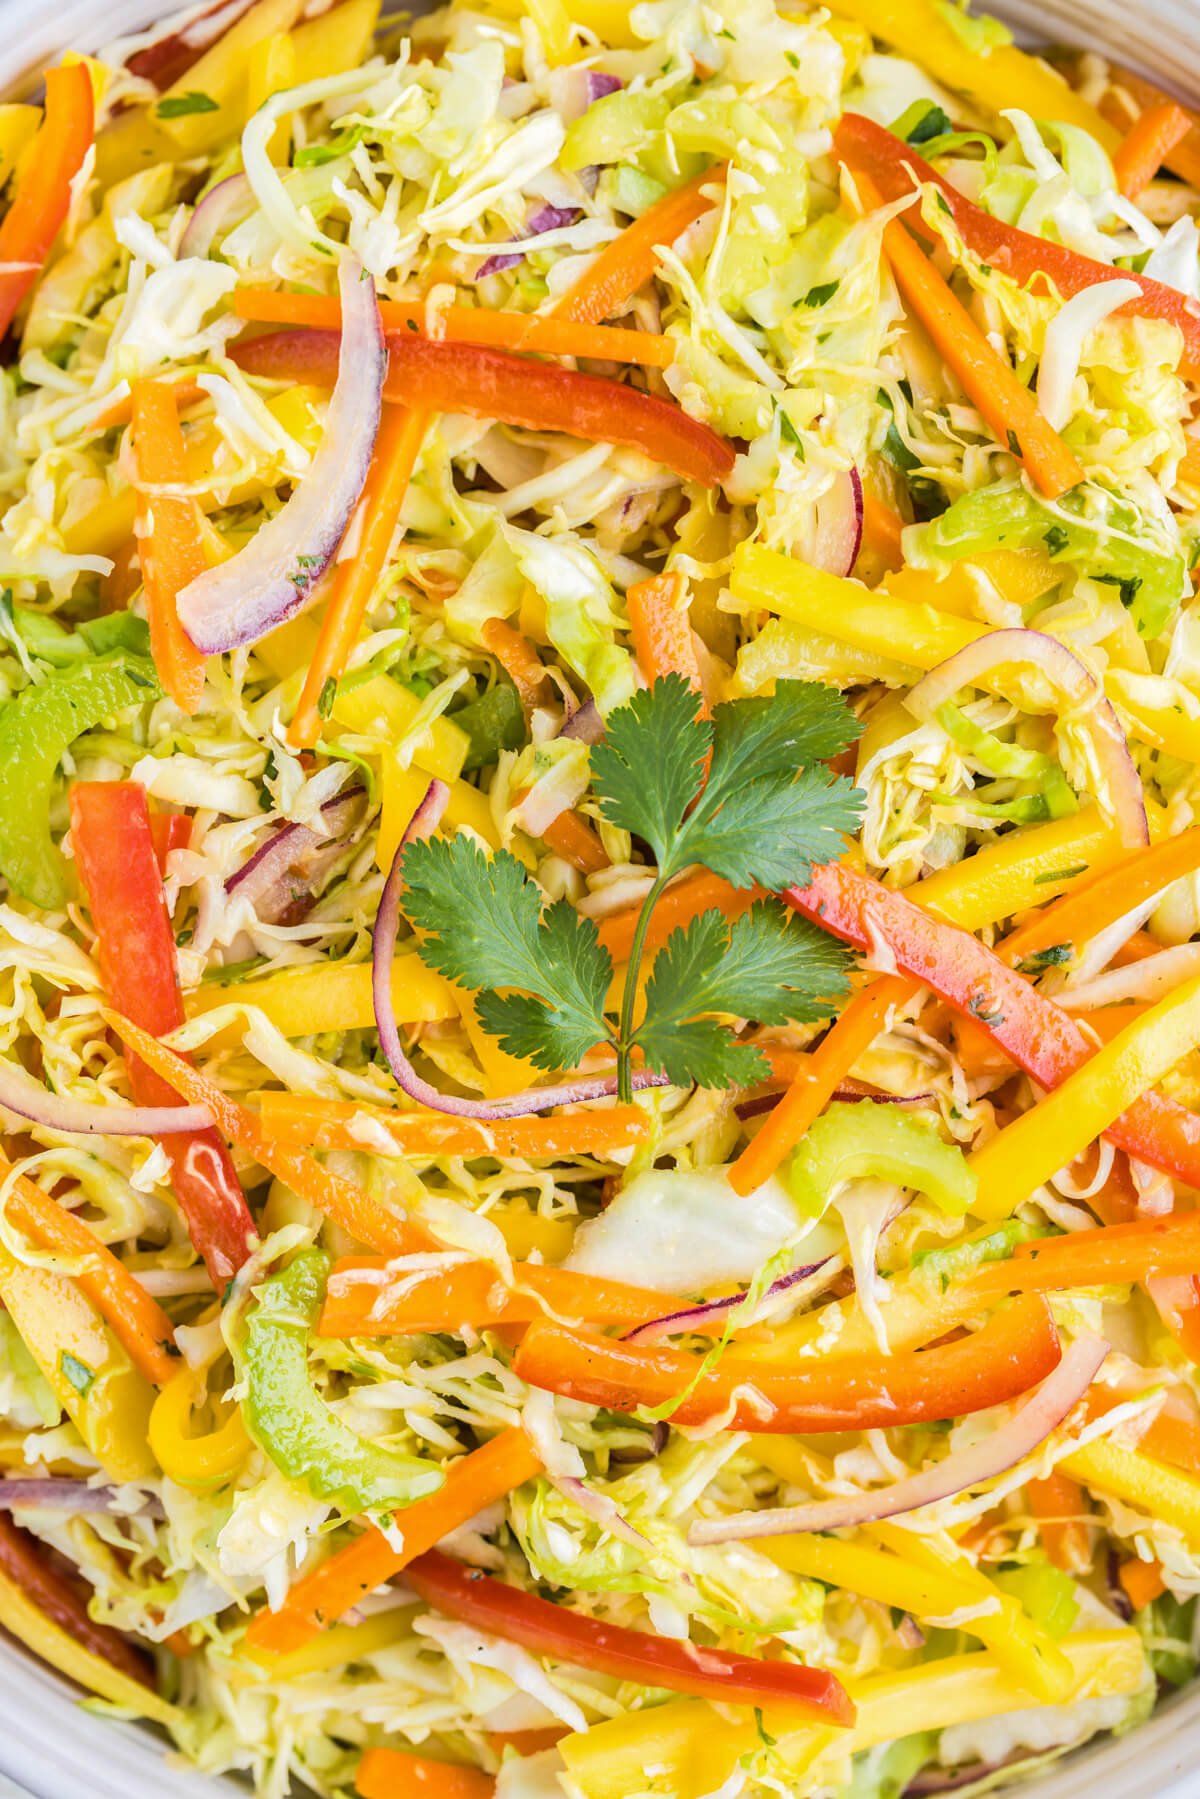 Close up photo of shredded cabbage, sliced bell pepper, red onions, and mango dressed in mango dressing with cilantro garnish.